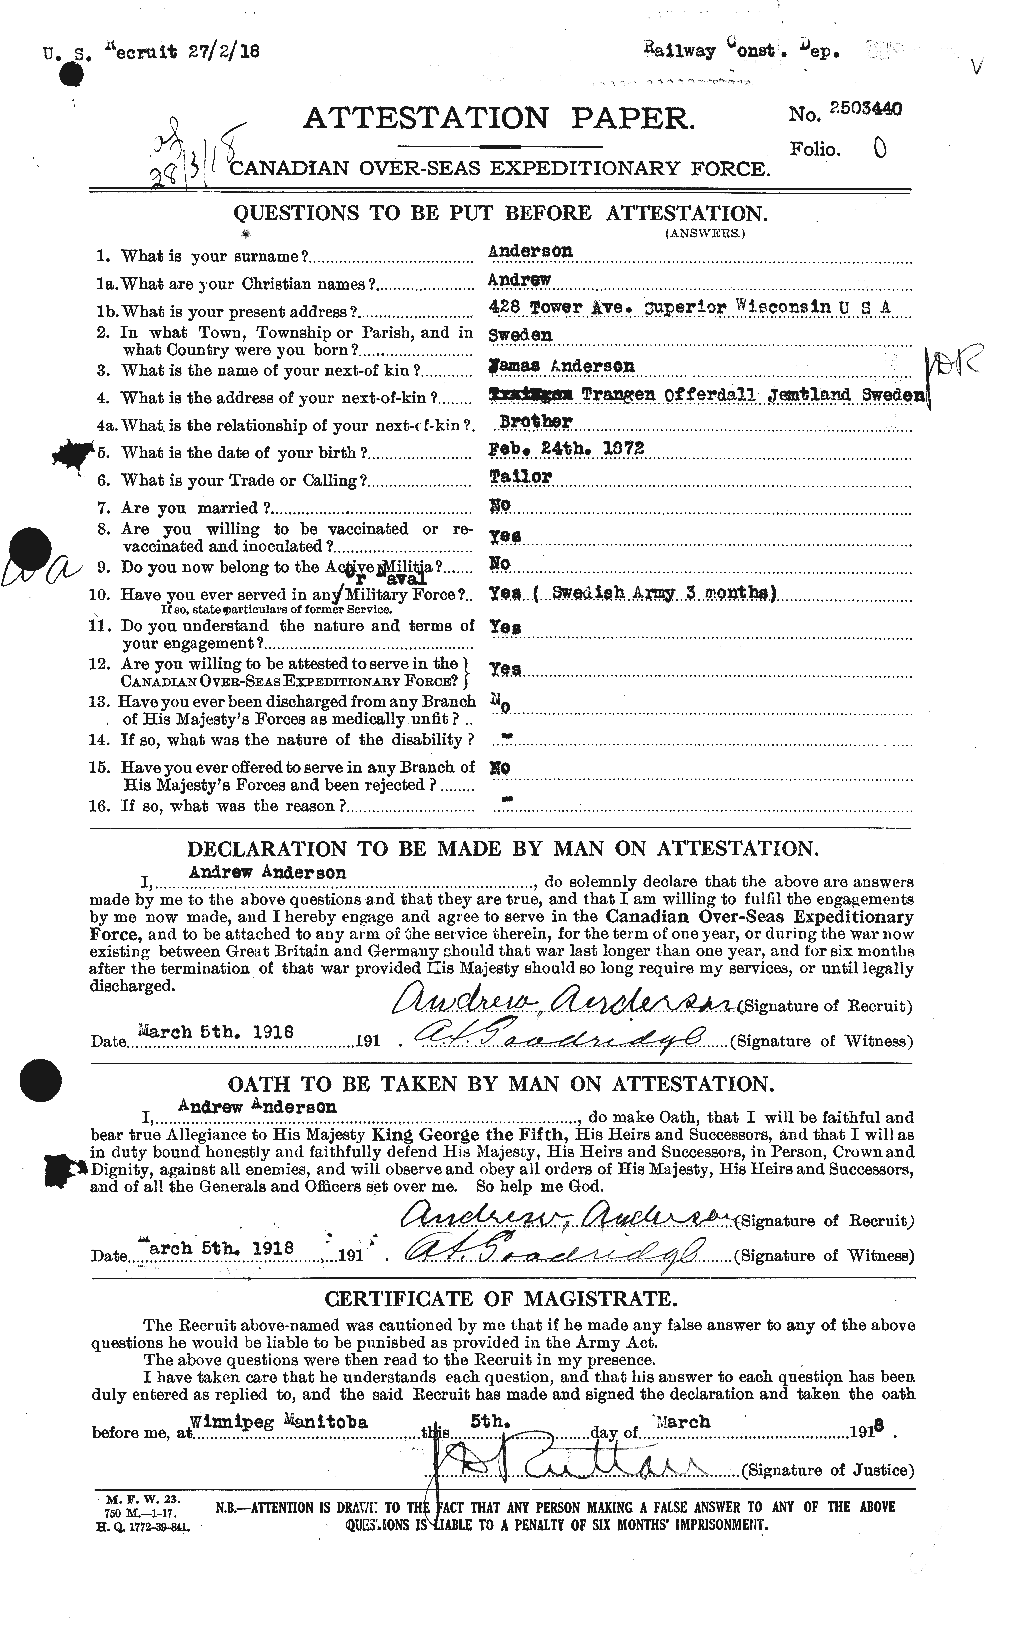 Personnel Records of the First World War - CEF 209433a